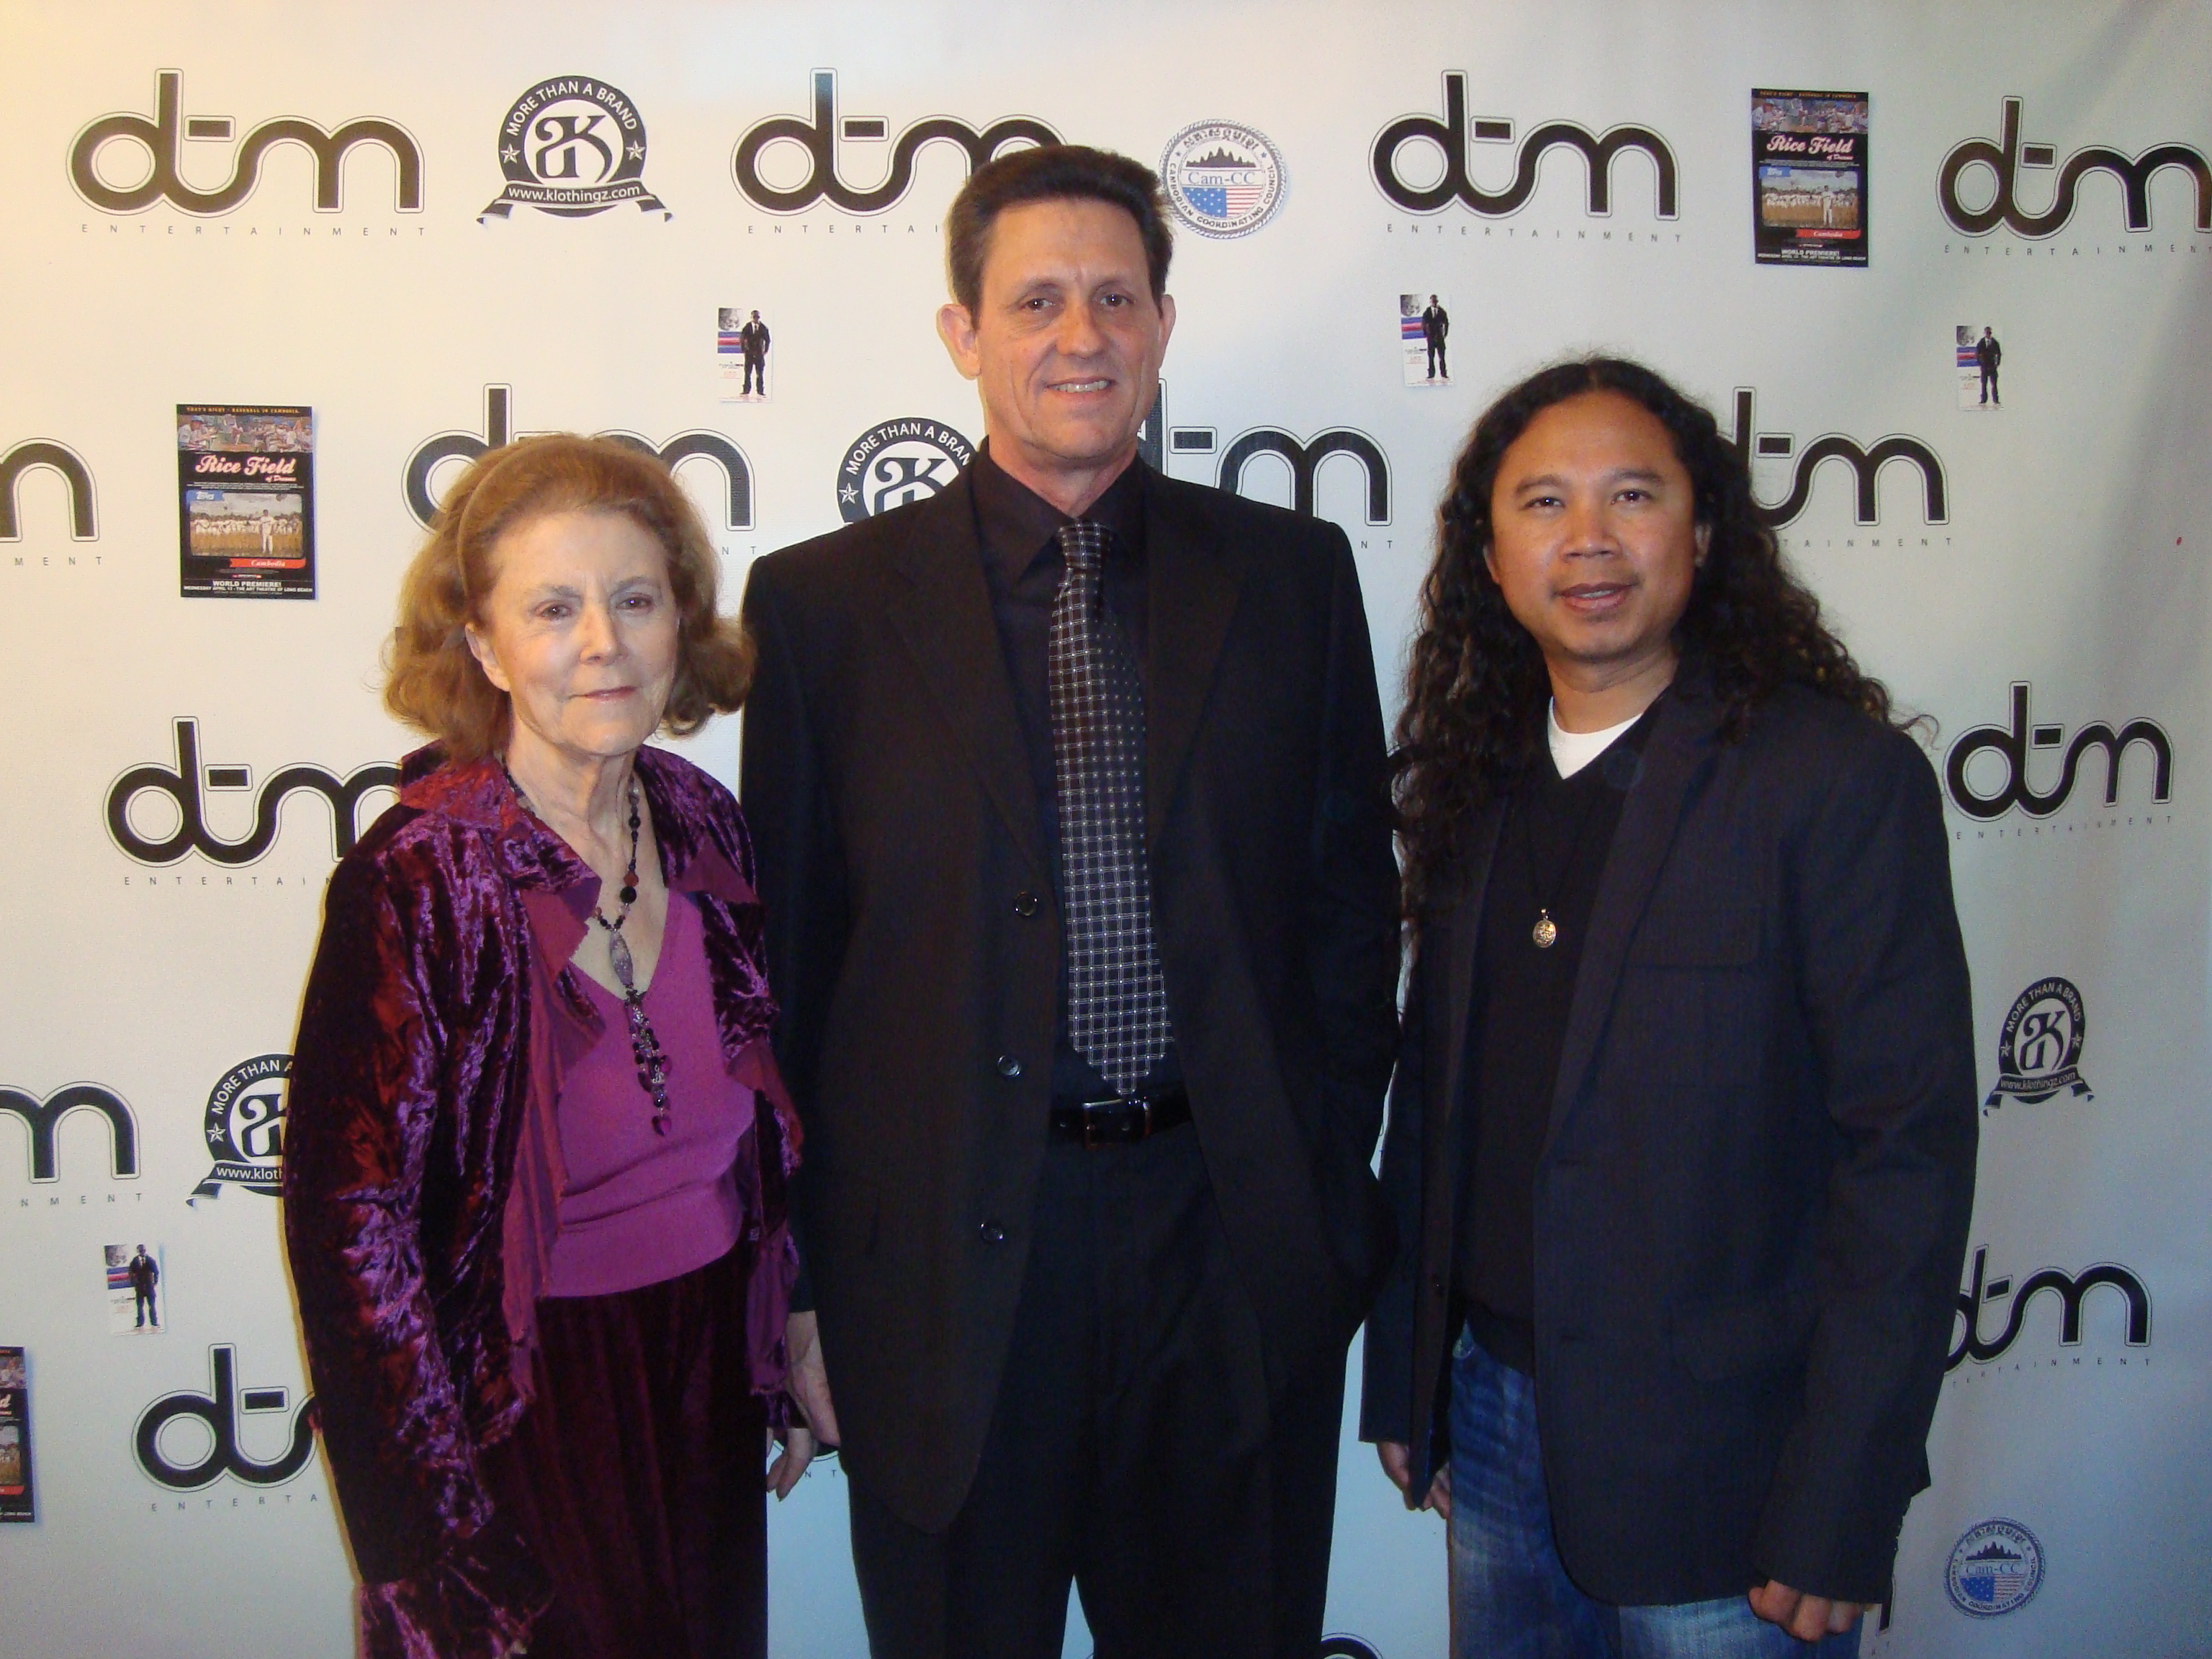 Roger Garcia with Casting Director Fran Bascom and Film Producer/Director Daron Ker during the Screening of Rice Field of Dreams